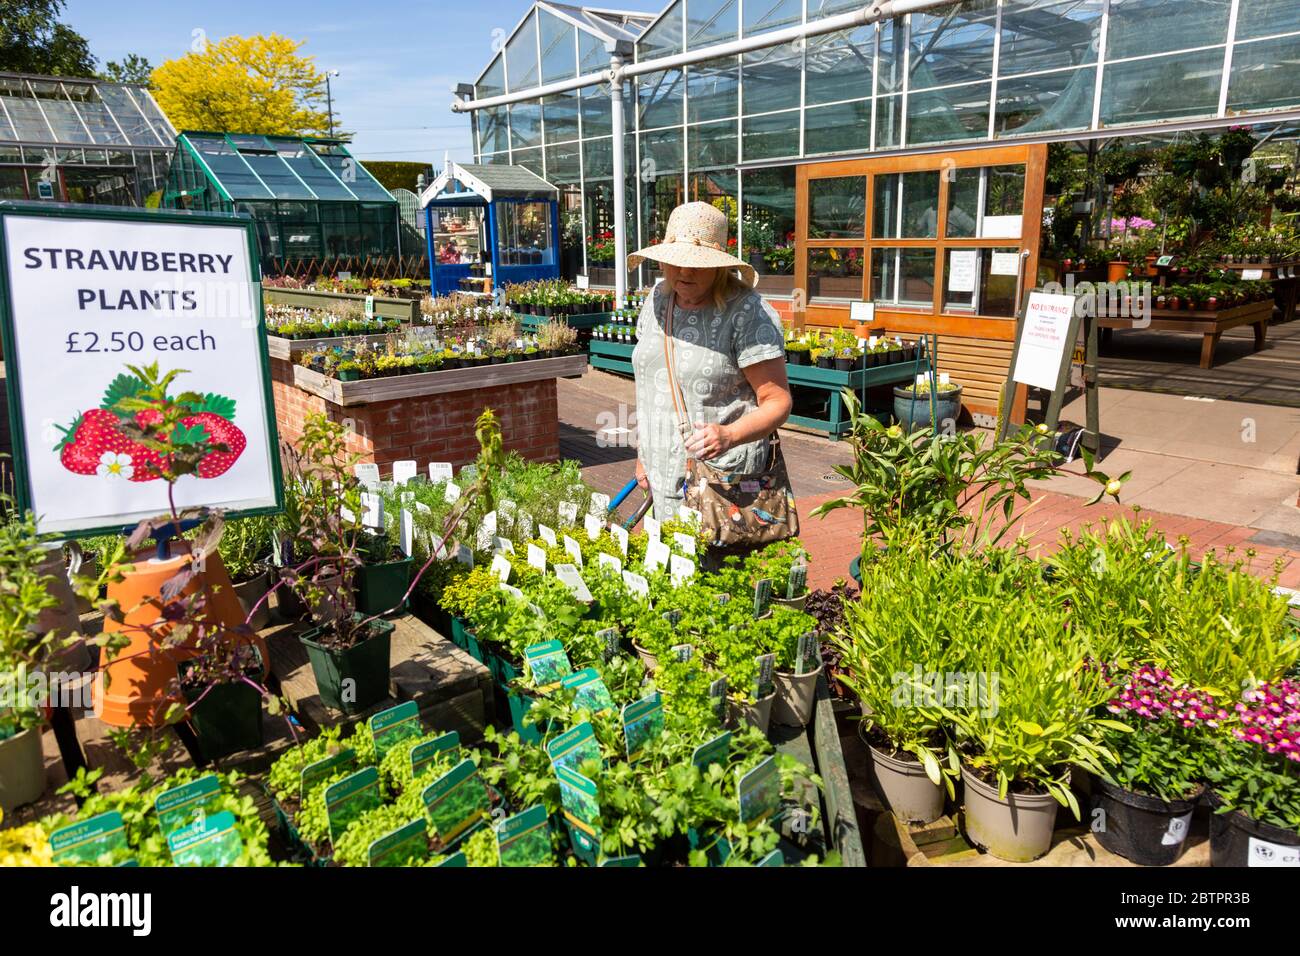 A woman browsing in a British garden centre outside display Stock Photo